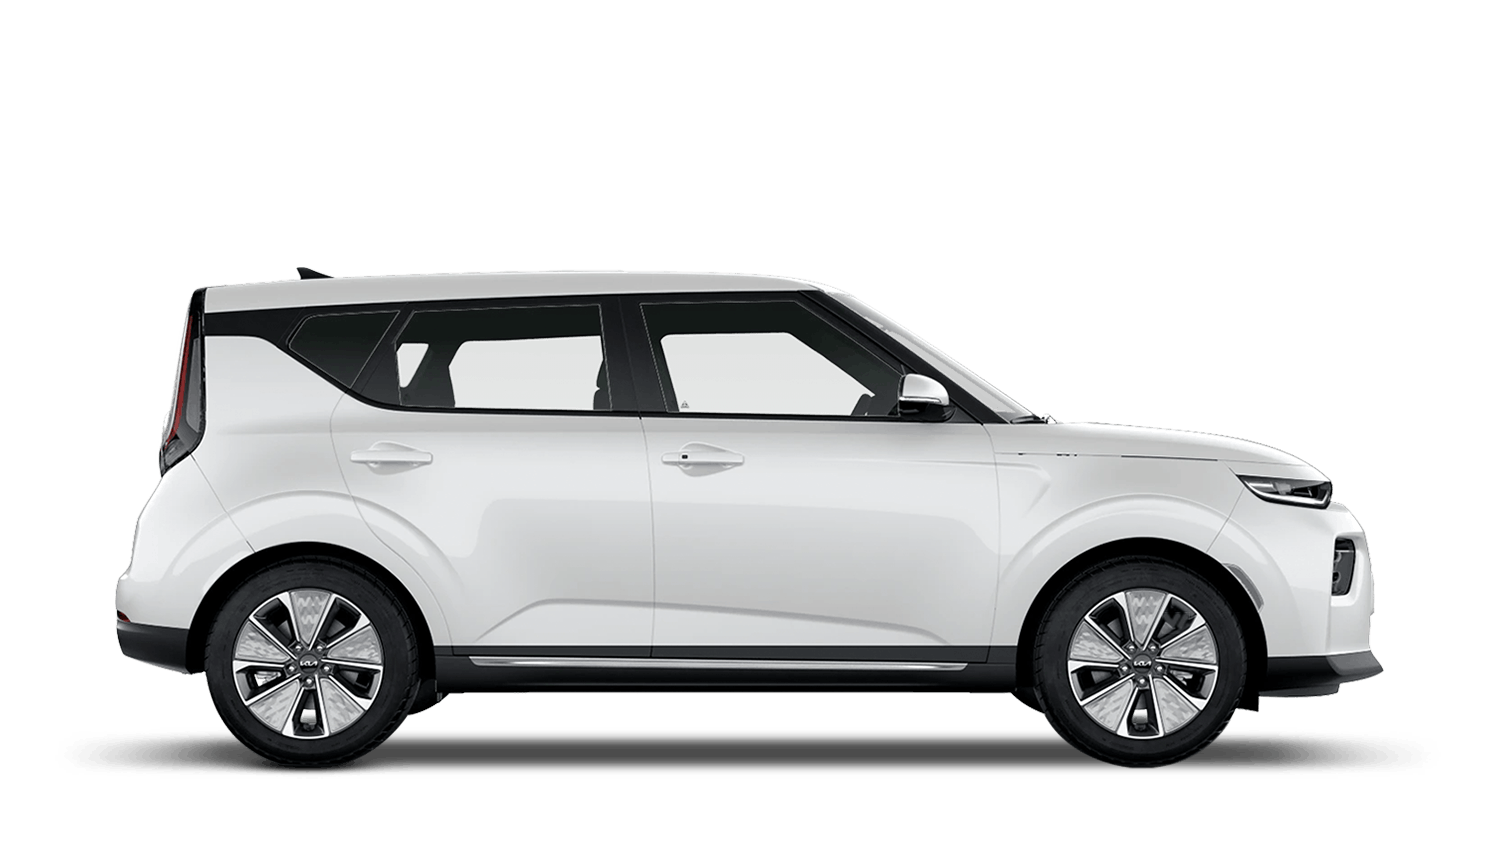 Soul EV100% Electric with up to 280 mile range